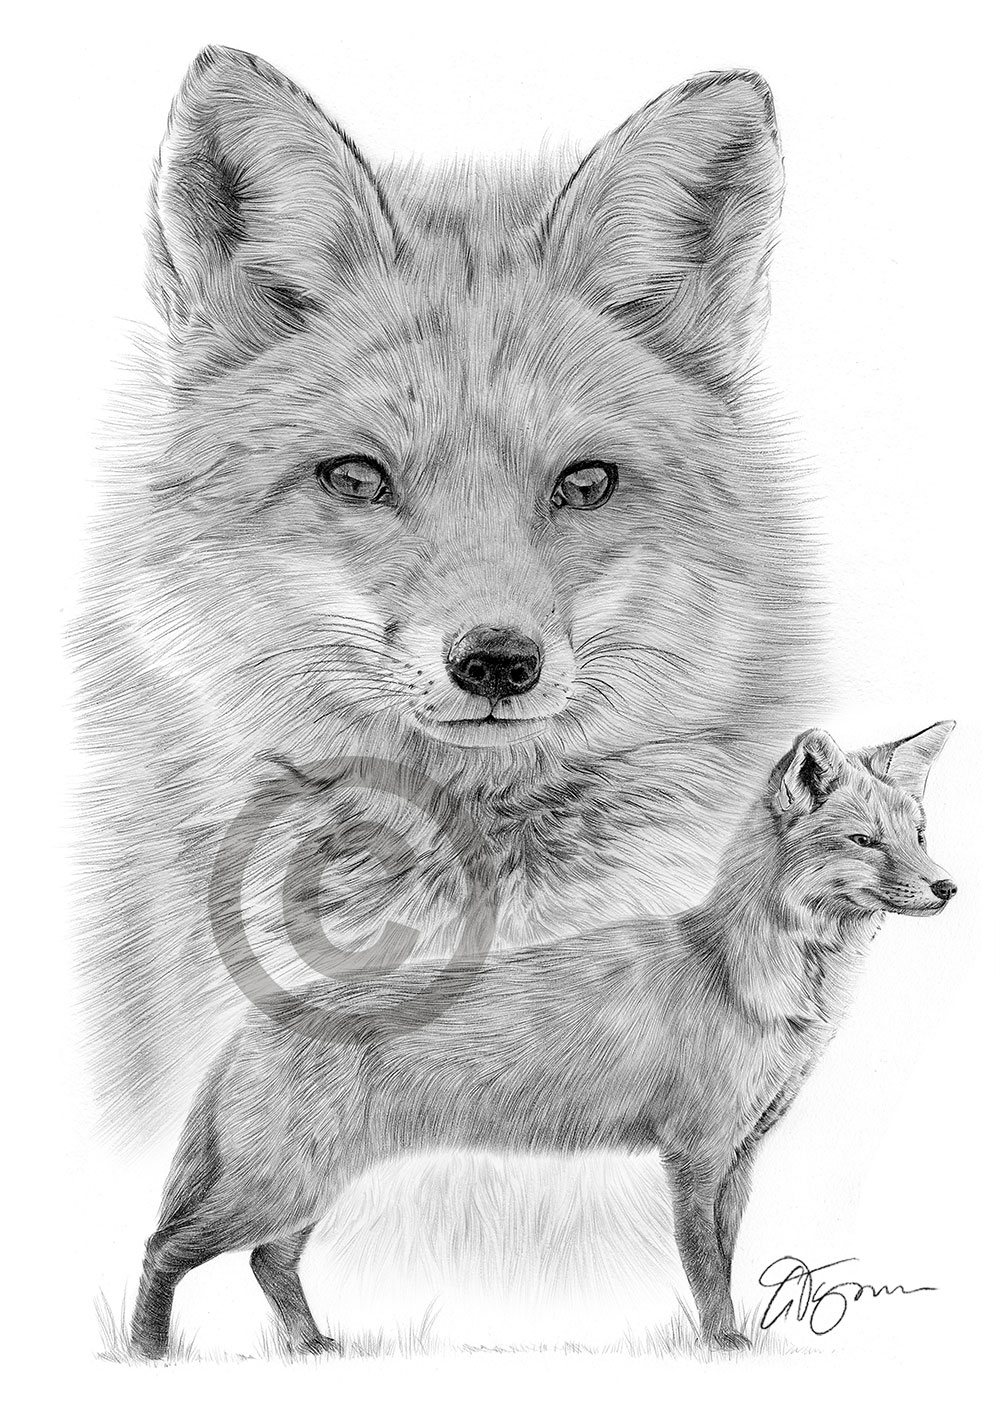 Pencil drawing of two red foxes by artist Gary Tymon